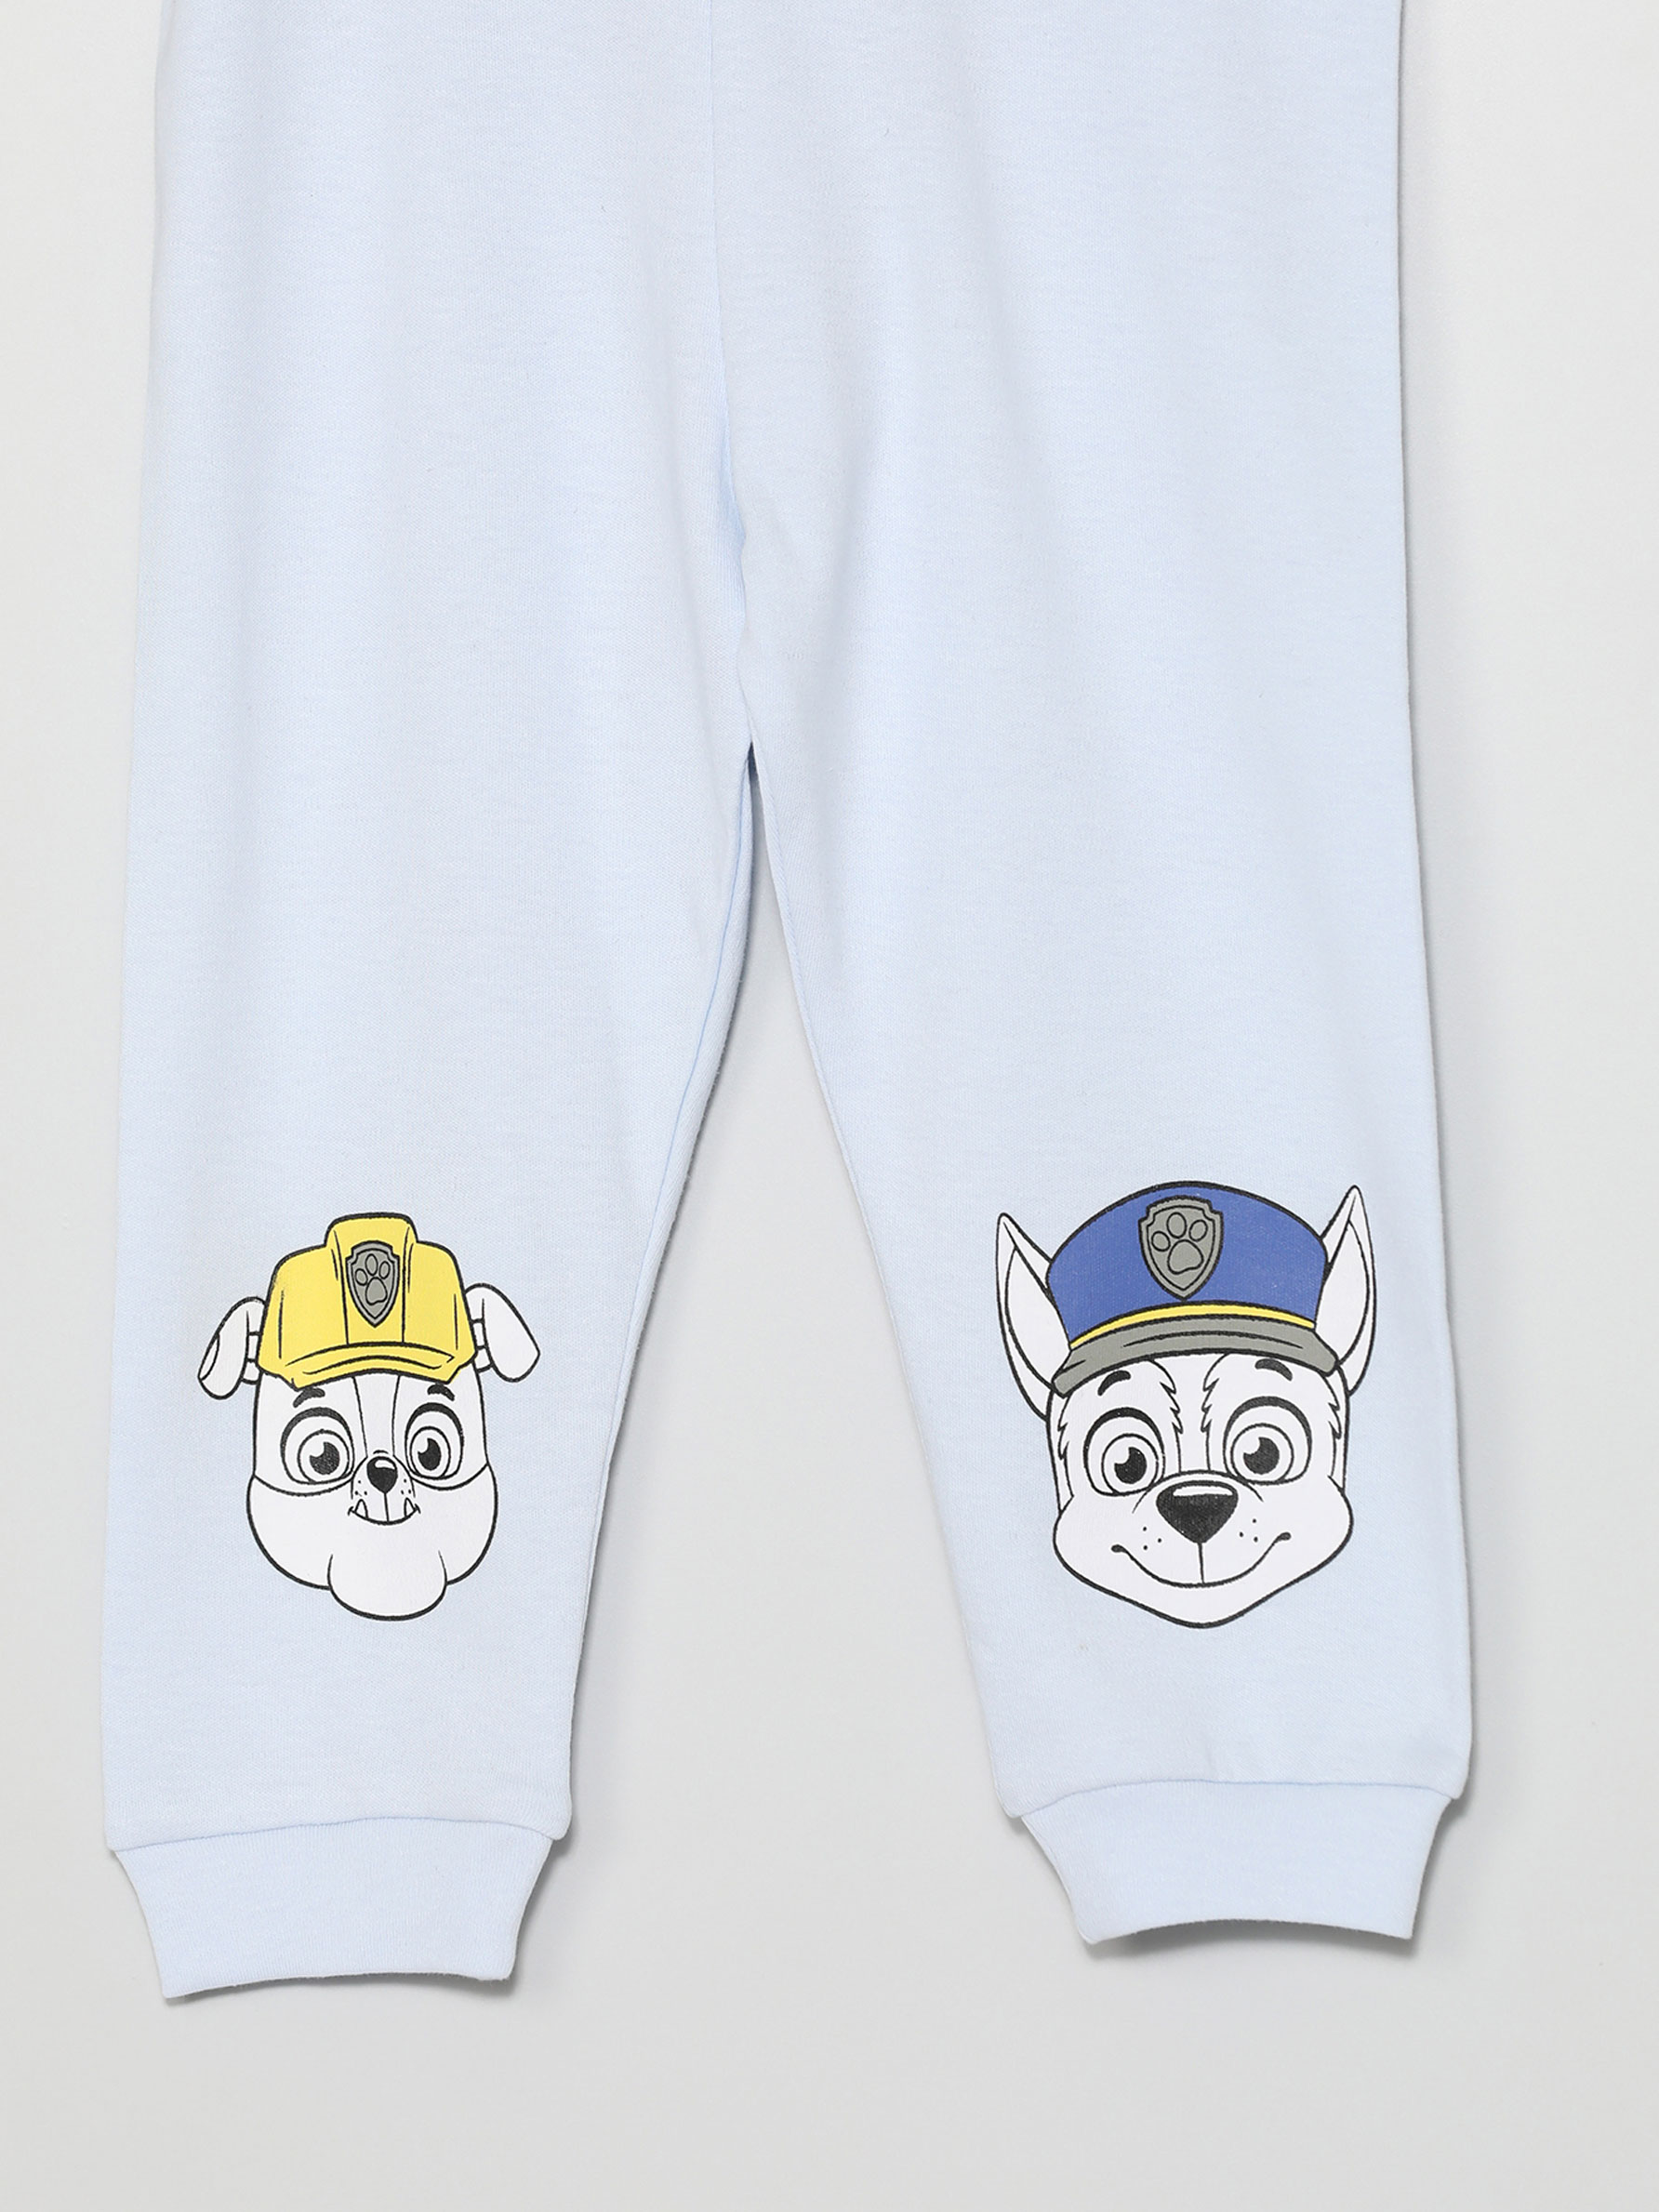 Nickelodeon’s Paw Patrol Pullover Long Sleeve Shirt and Jogger Pant Set for Boys Active Wear for Kids 